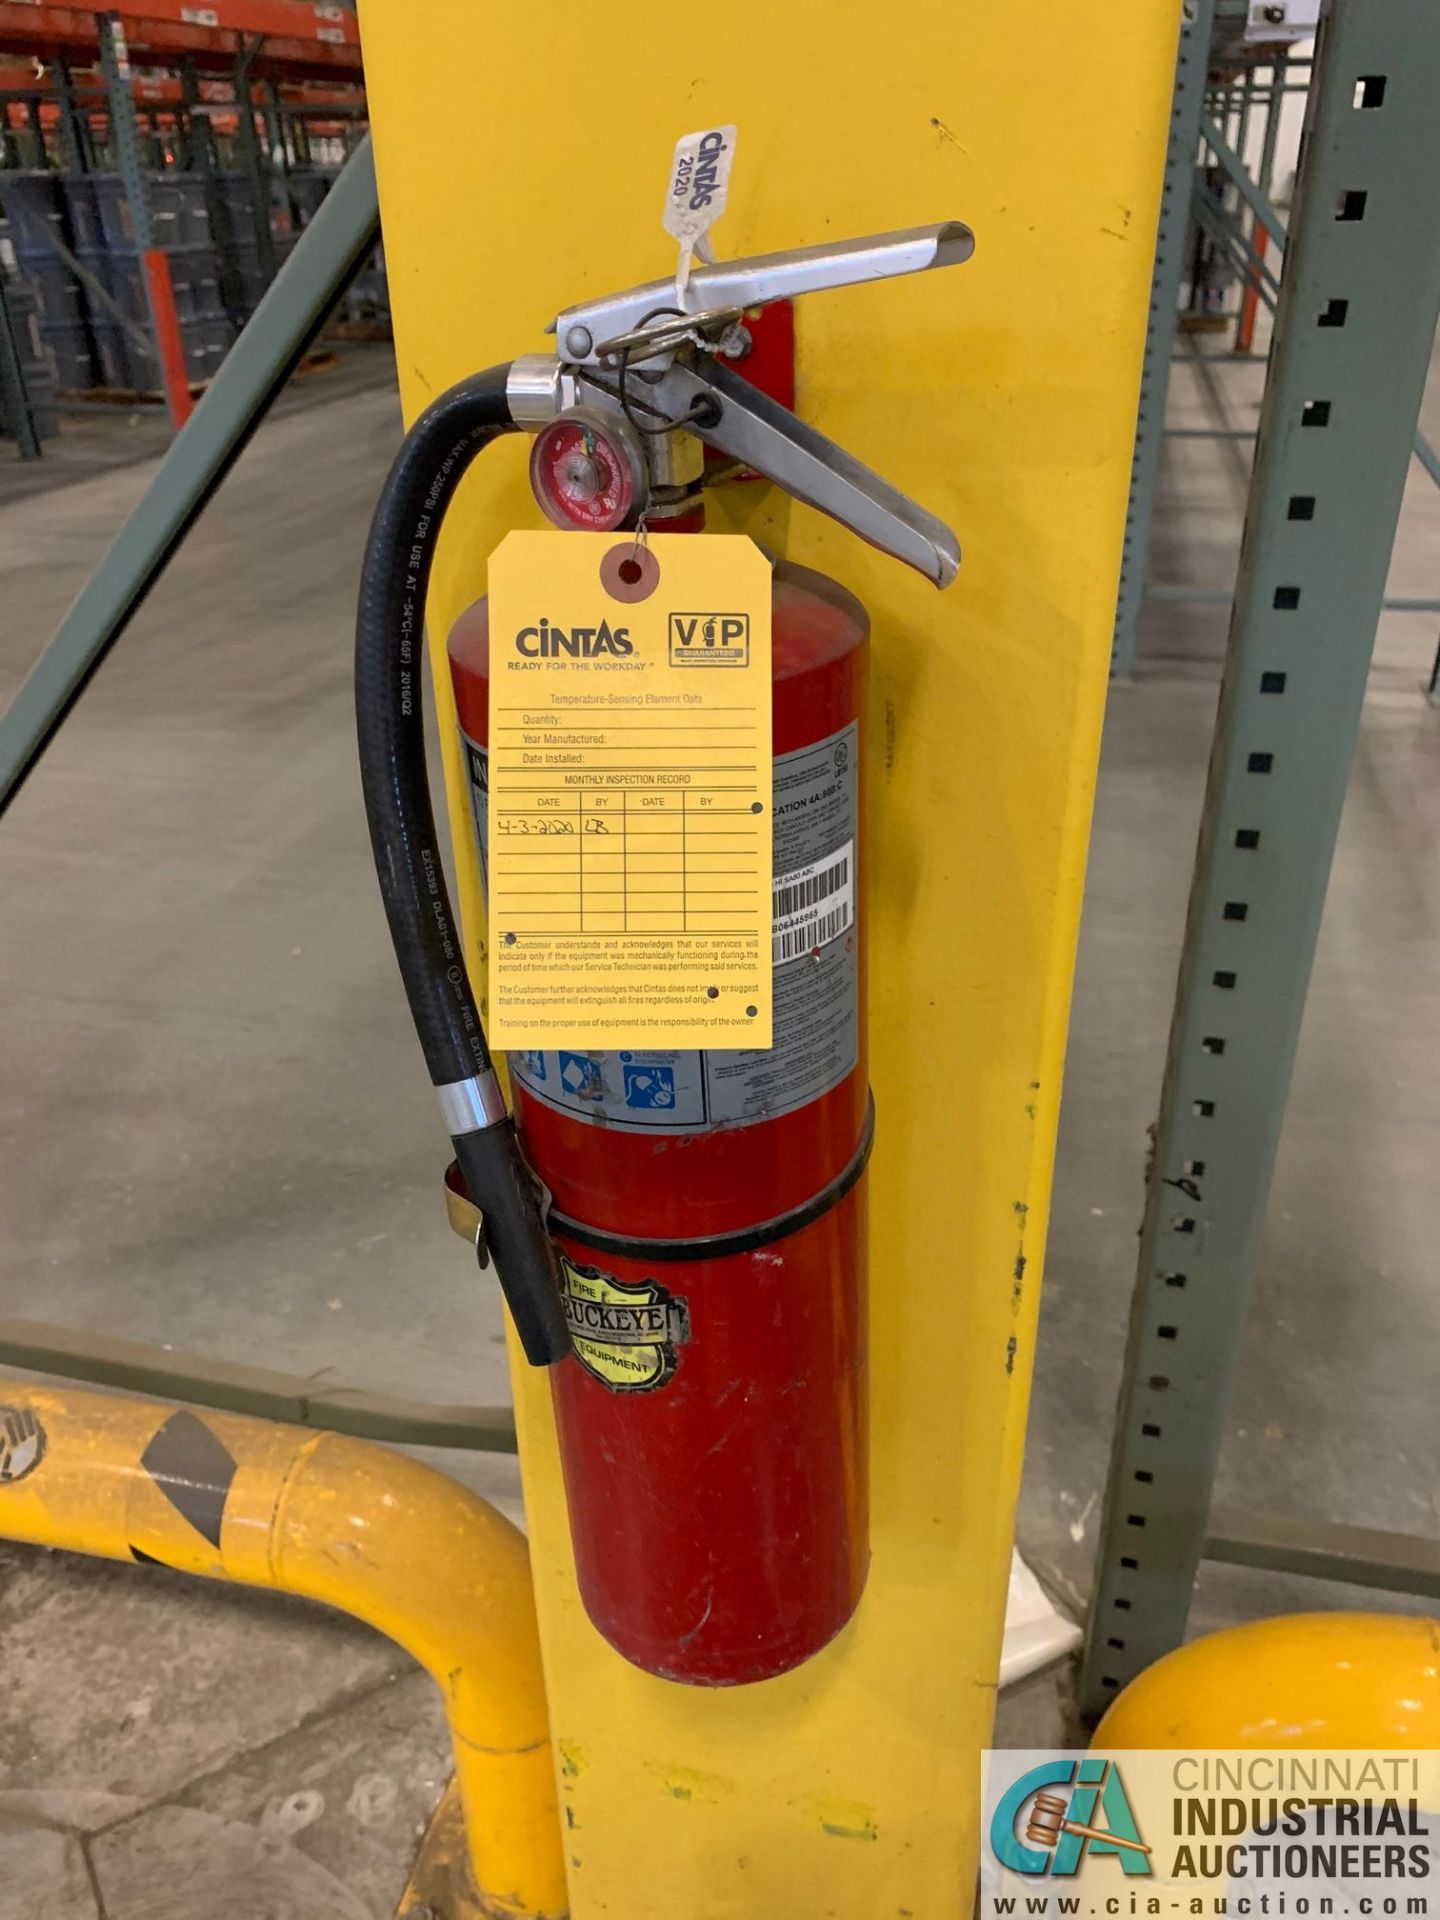 APPROX. (50) FIRE EXTINGUISHER (5400 OAKLEY INDUSTRIAL BLVD., FAIRBURN, GA 30213) - Image 2 of 5